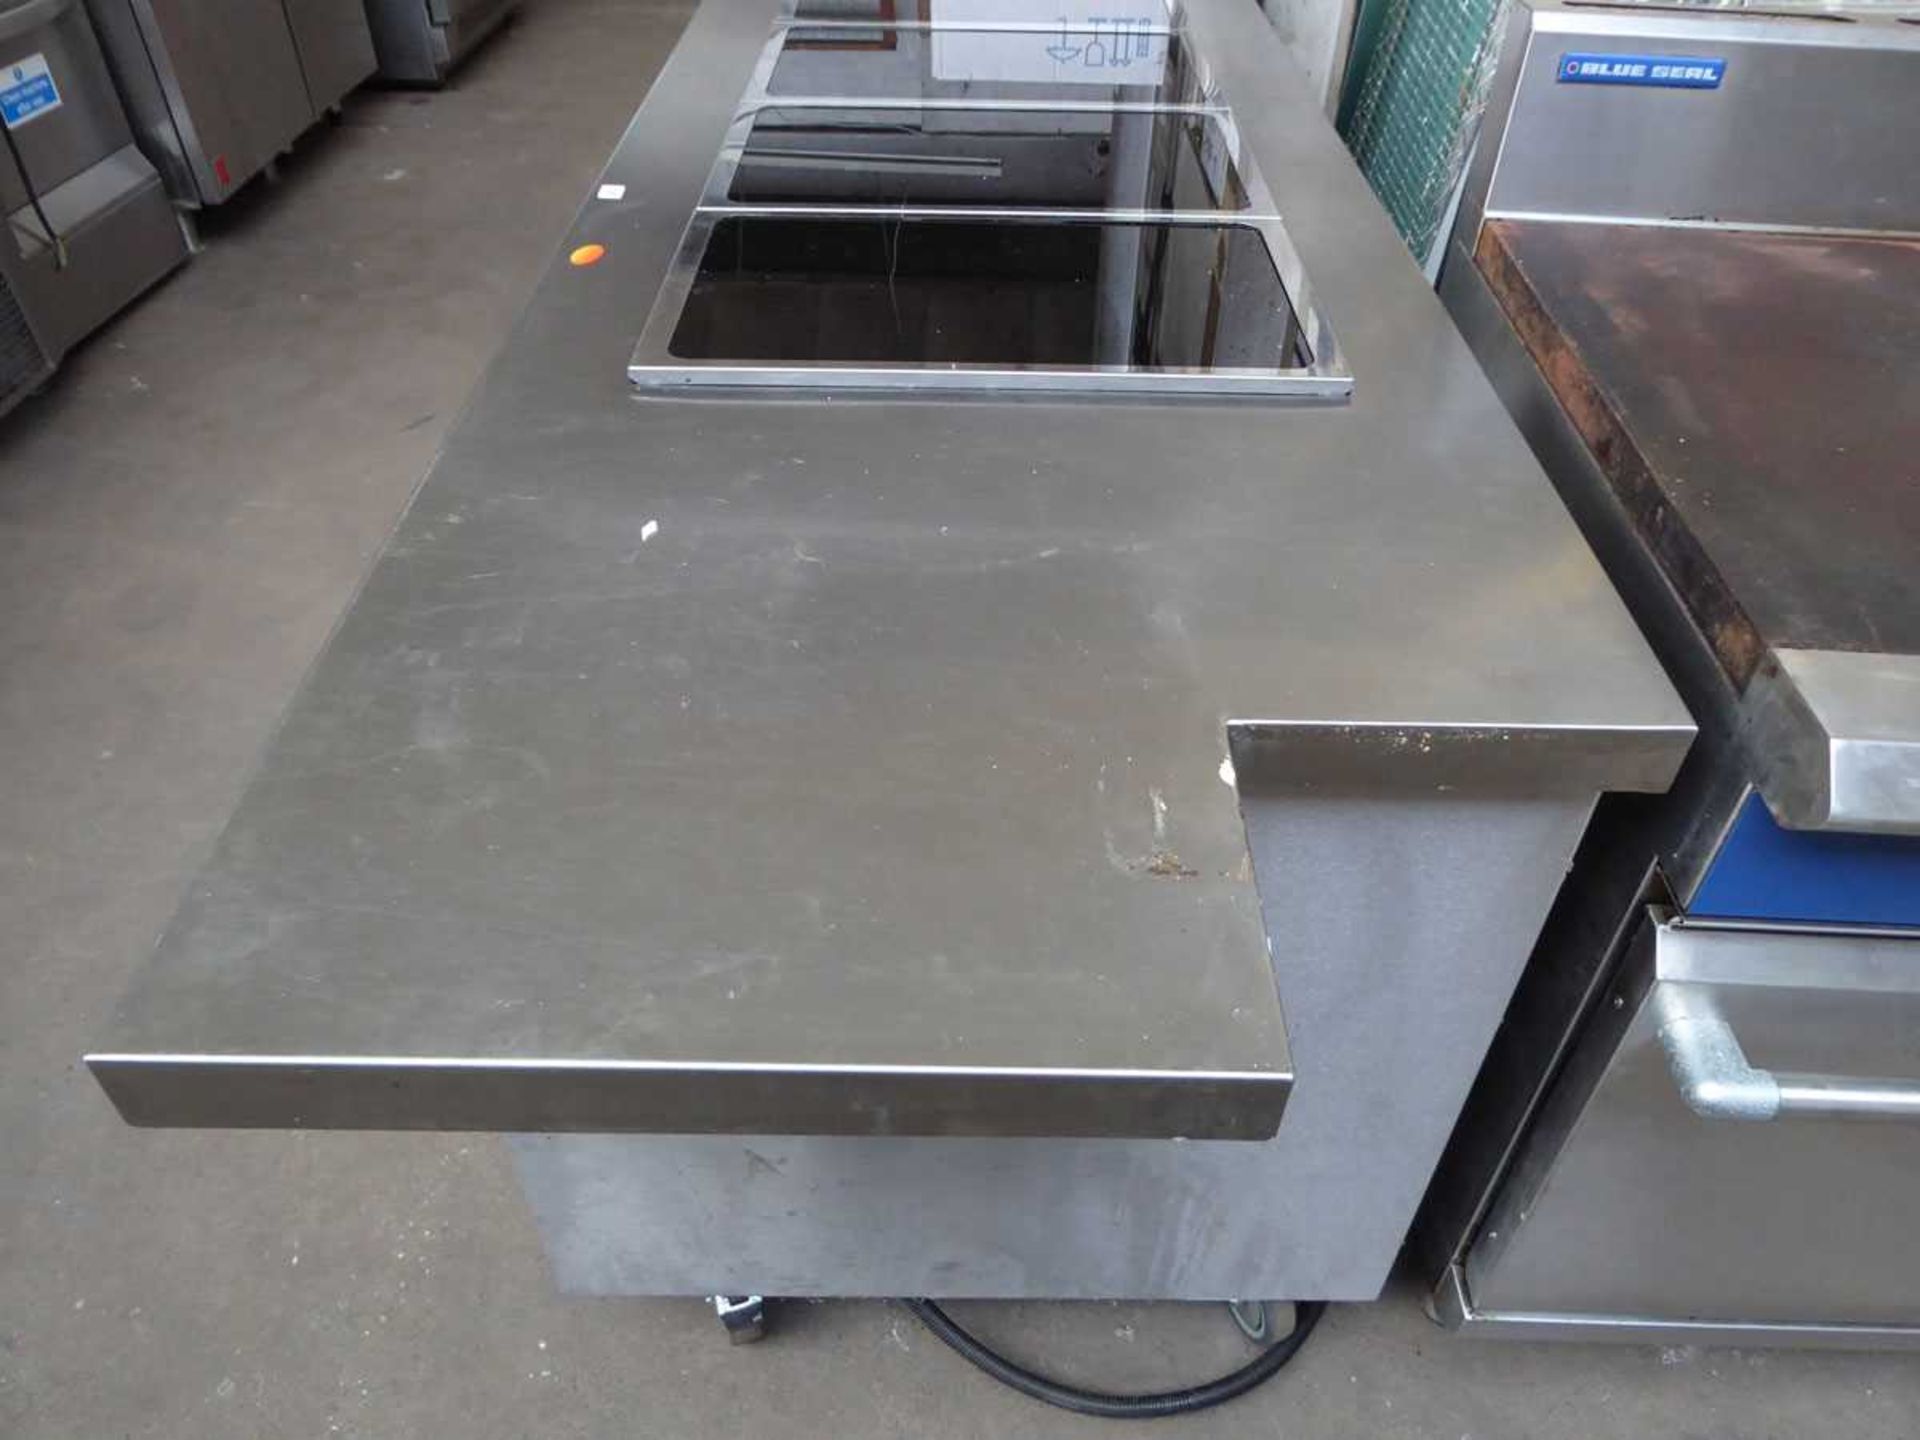 200cm electric mobile heated servery unit with 4 ceramic plate and large sliding cupboard under - Bild 3 aus 3